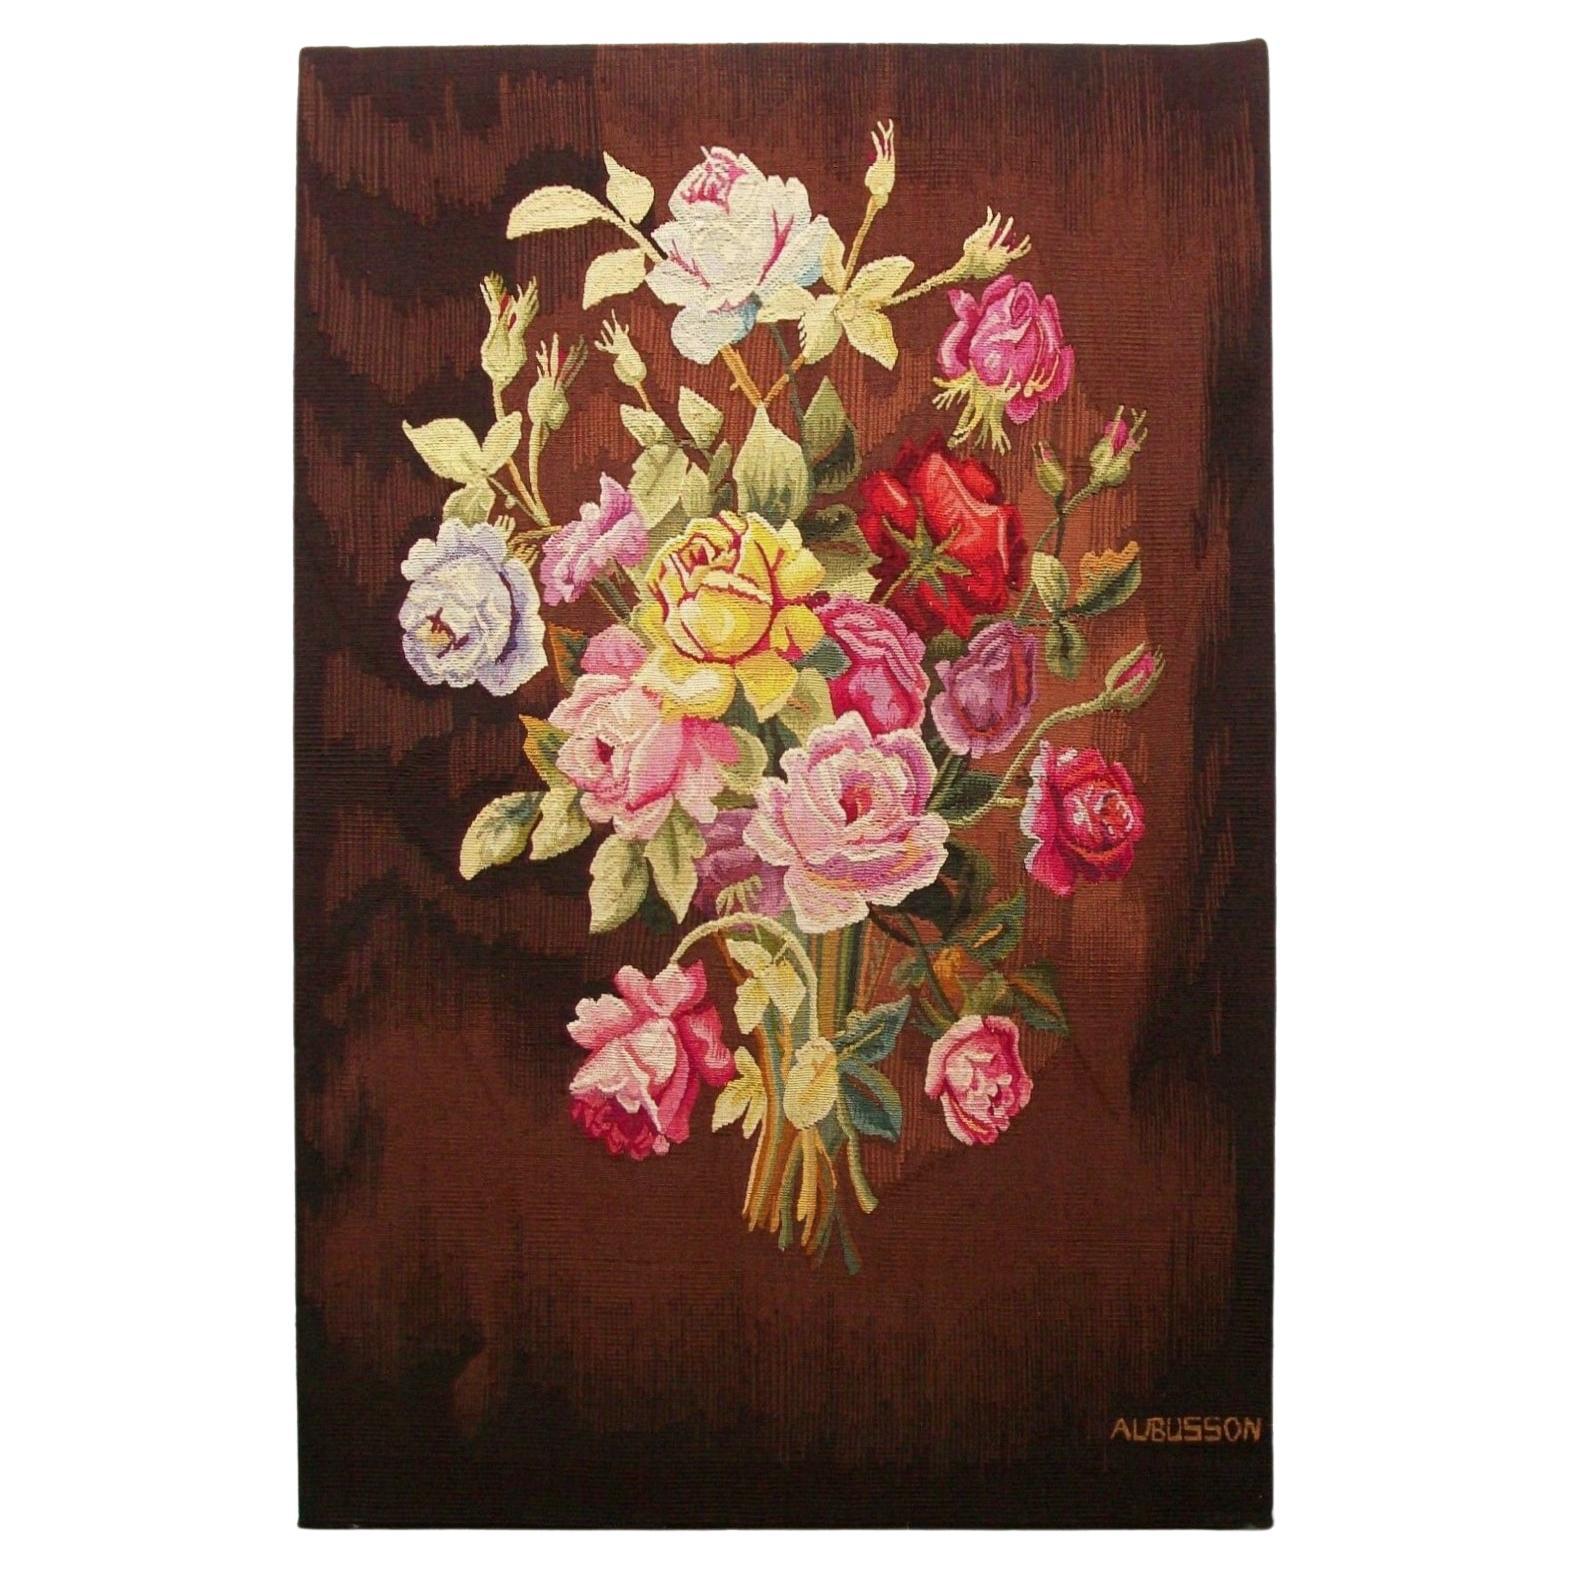 Vintage Aubusson Floral Tapestry Panel, Wool & Silk, France, Mid 20th Century